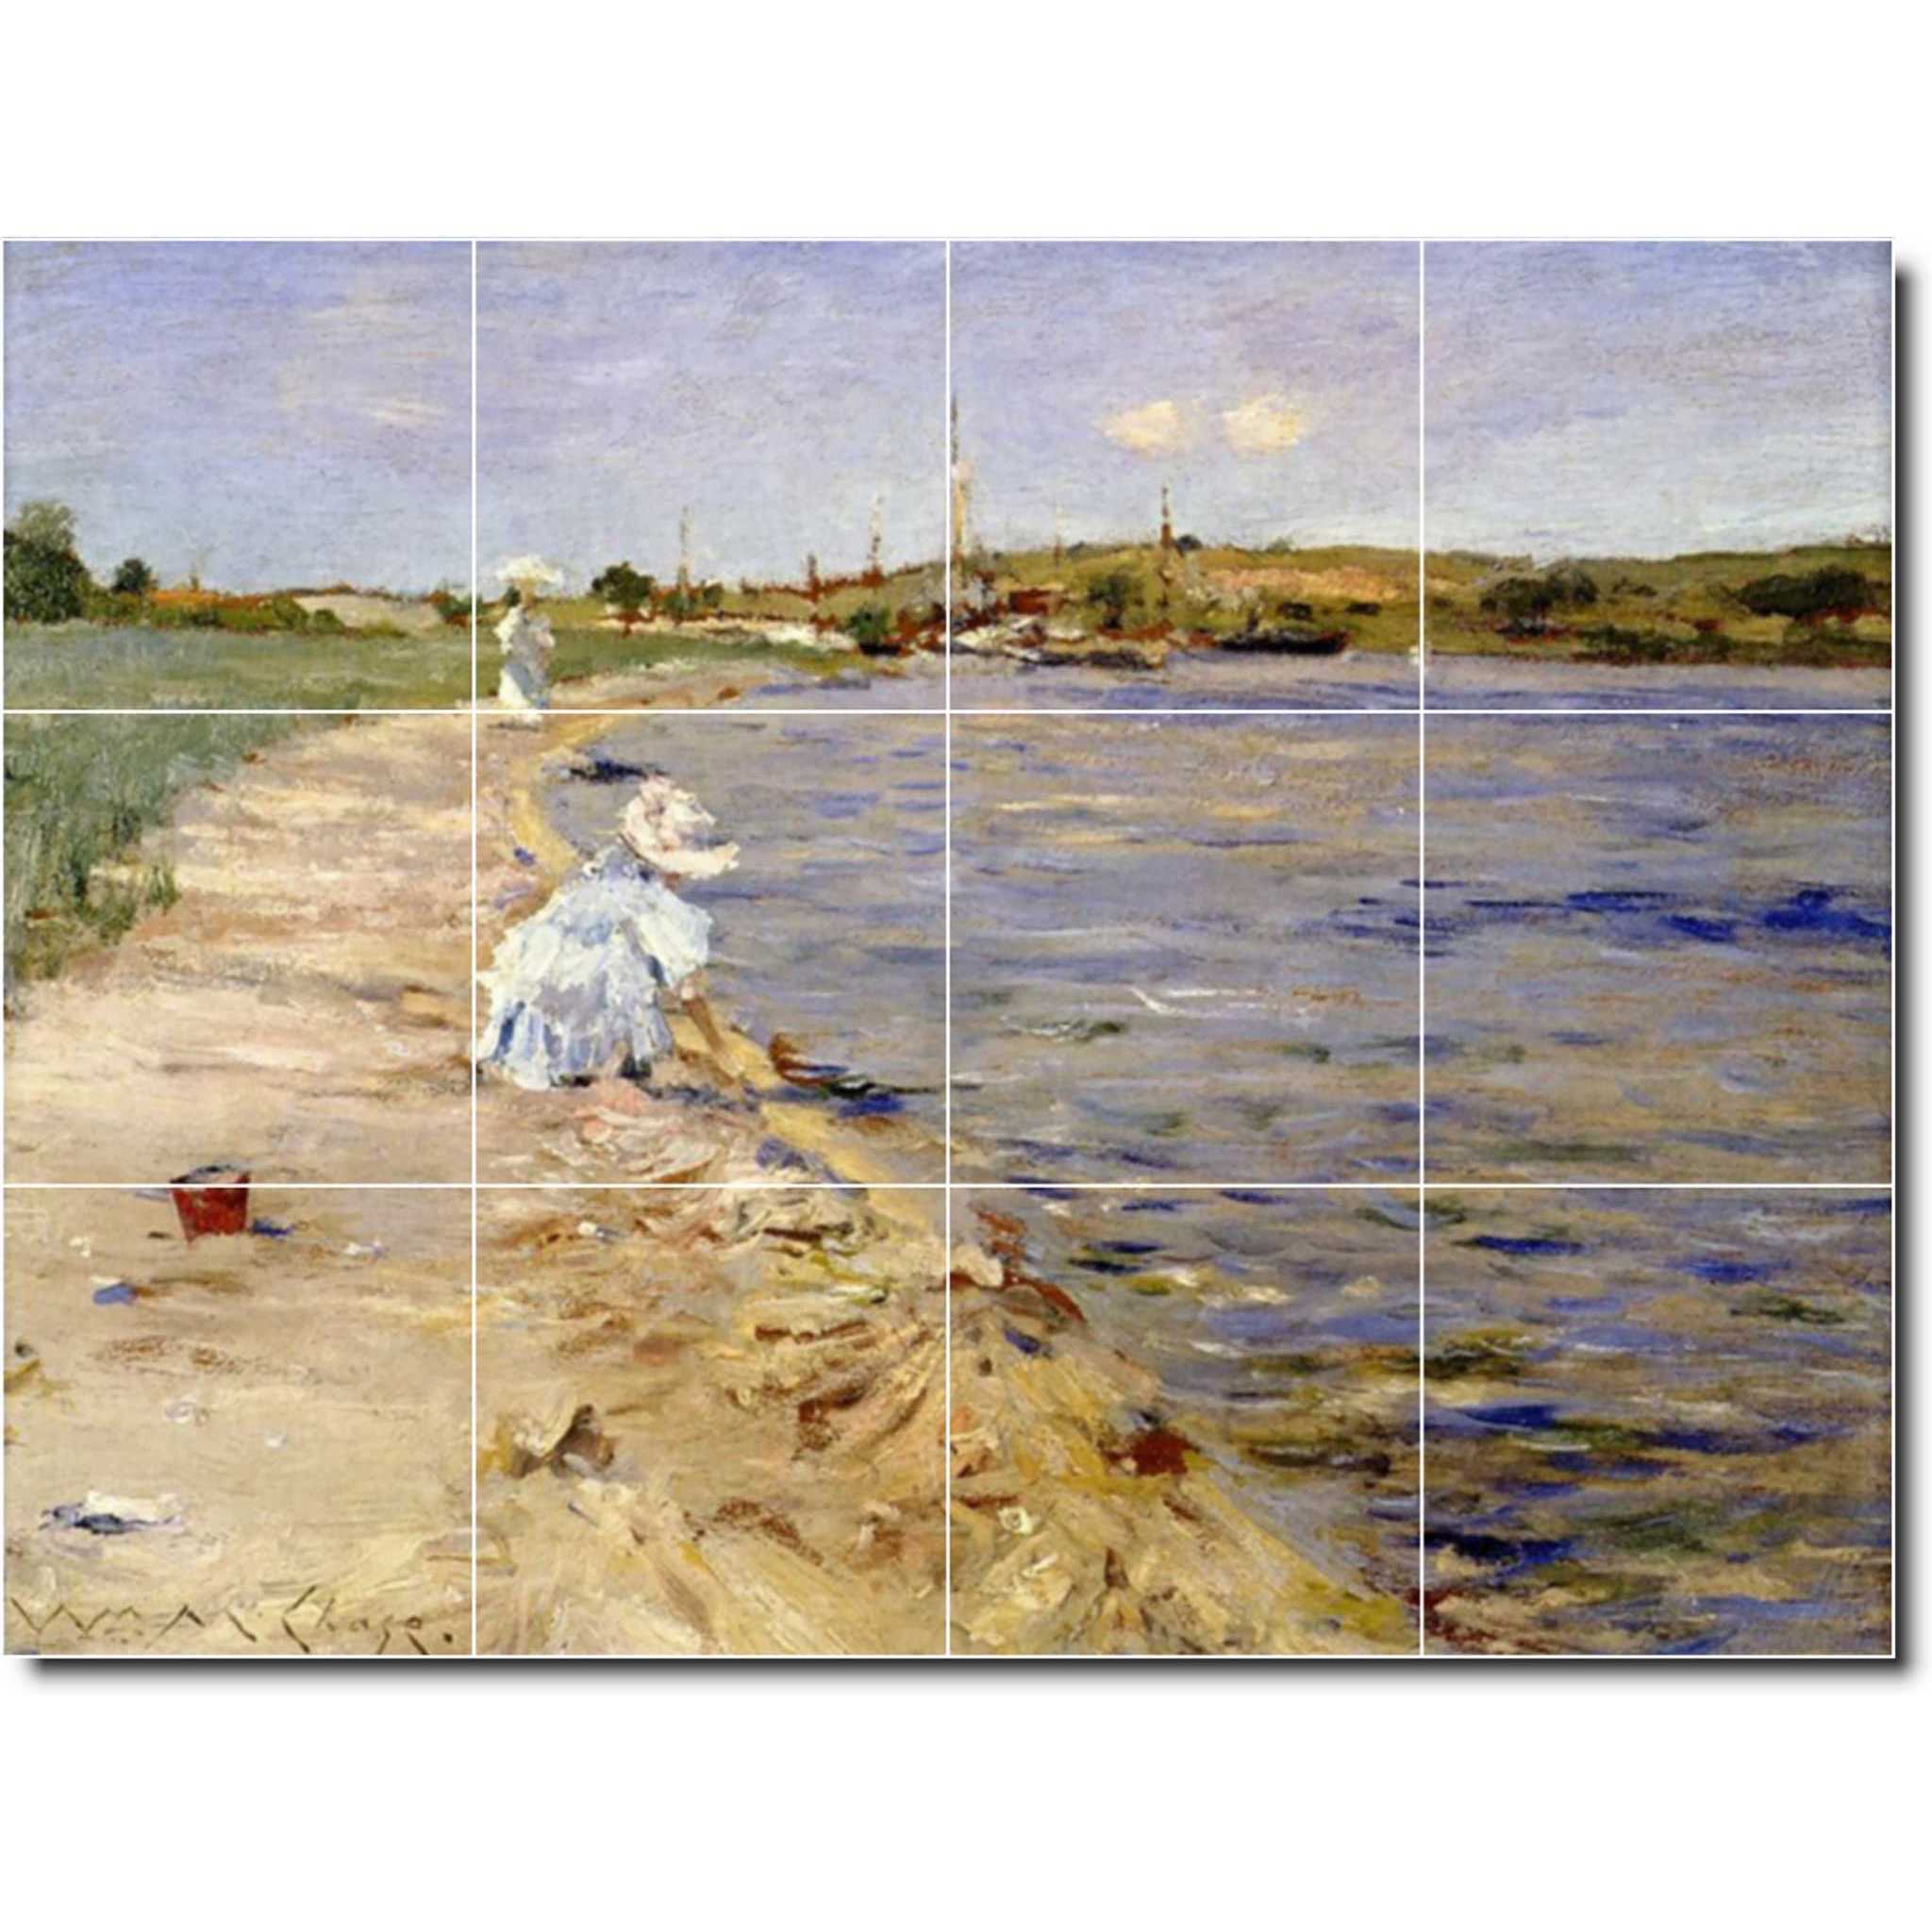 william chase waterfront painting ceramic tile mural p01495